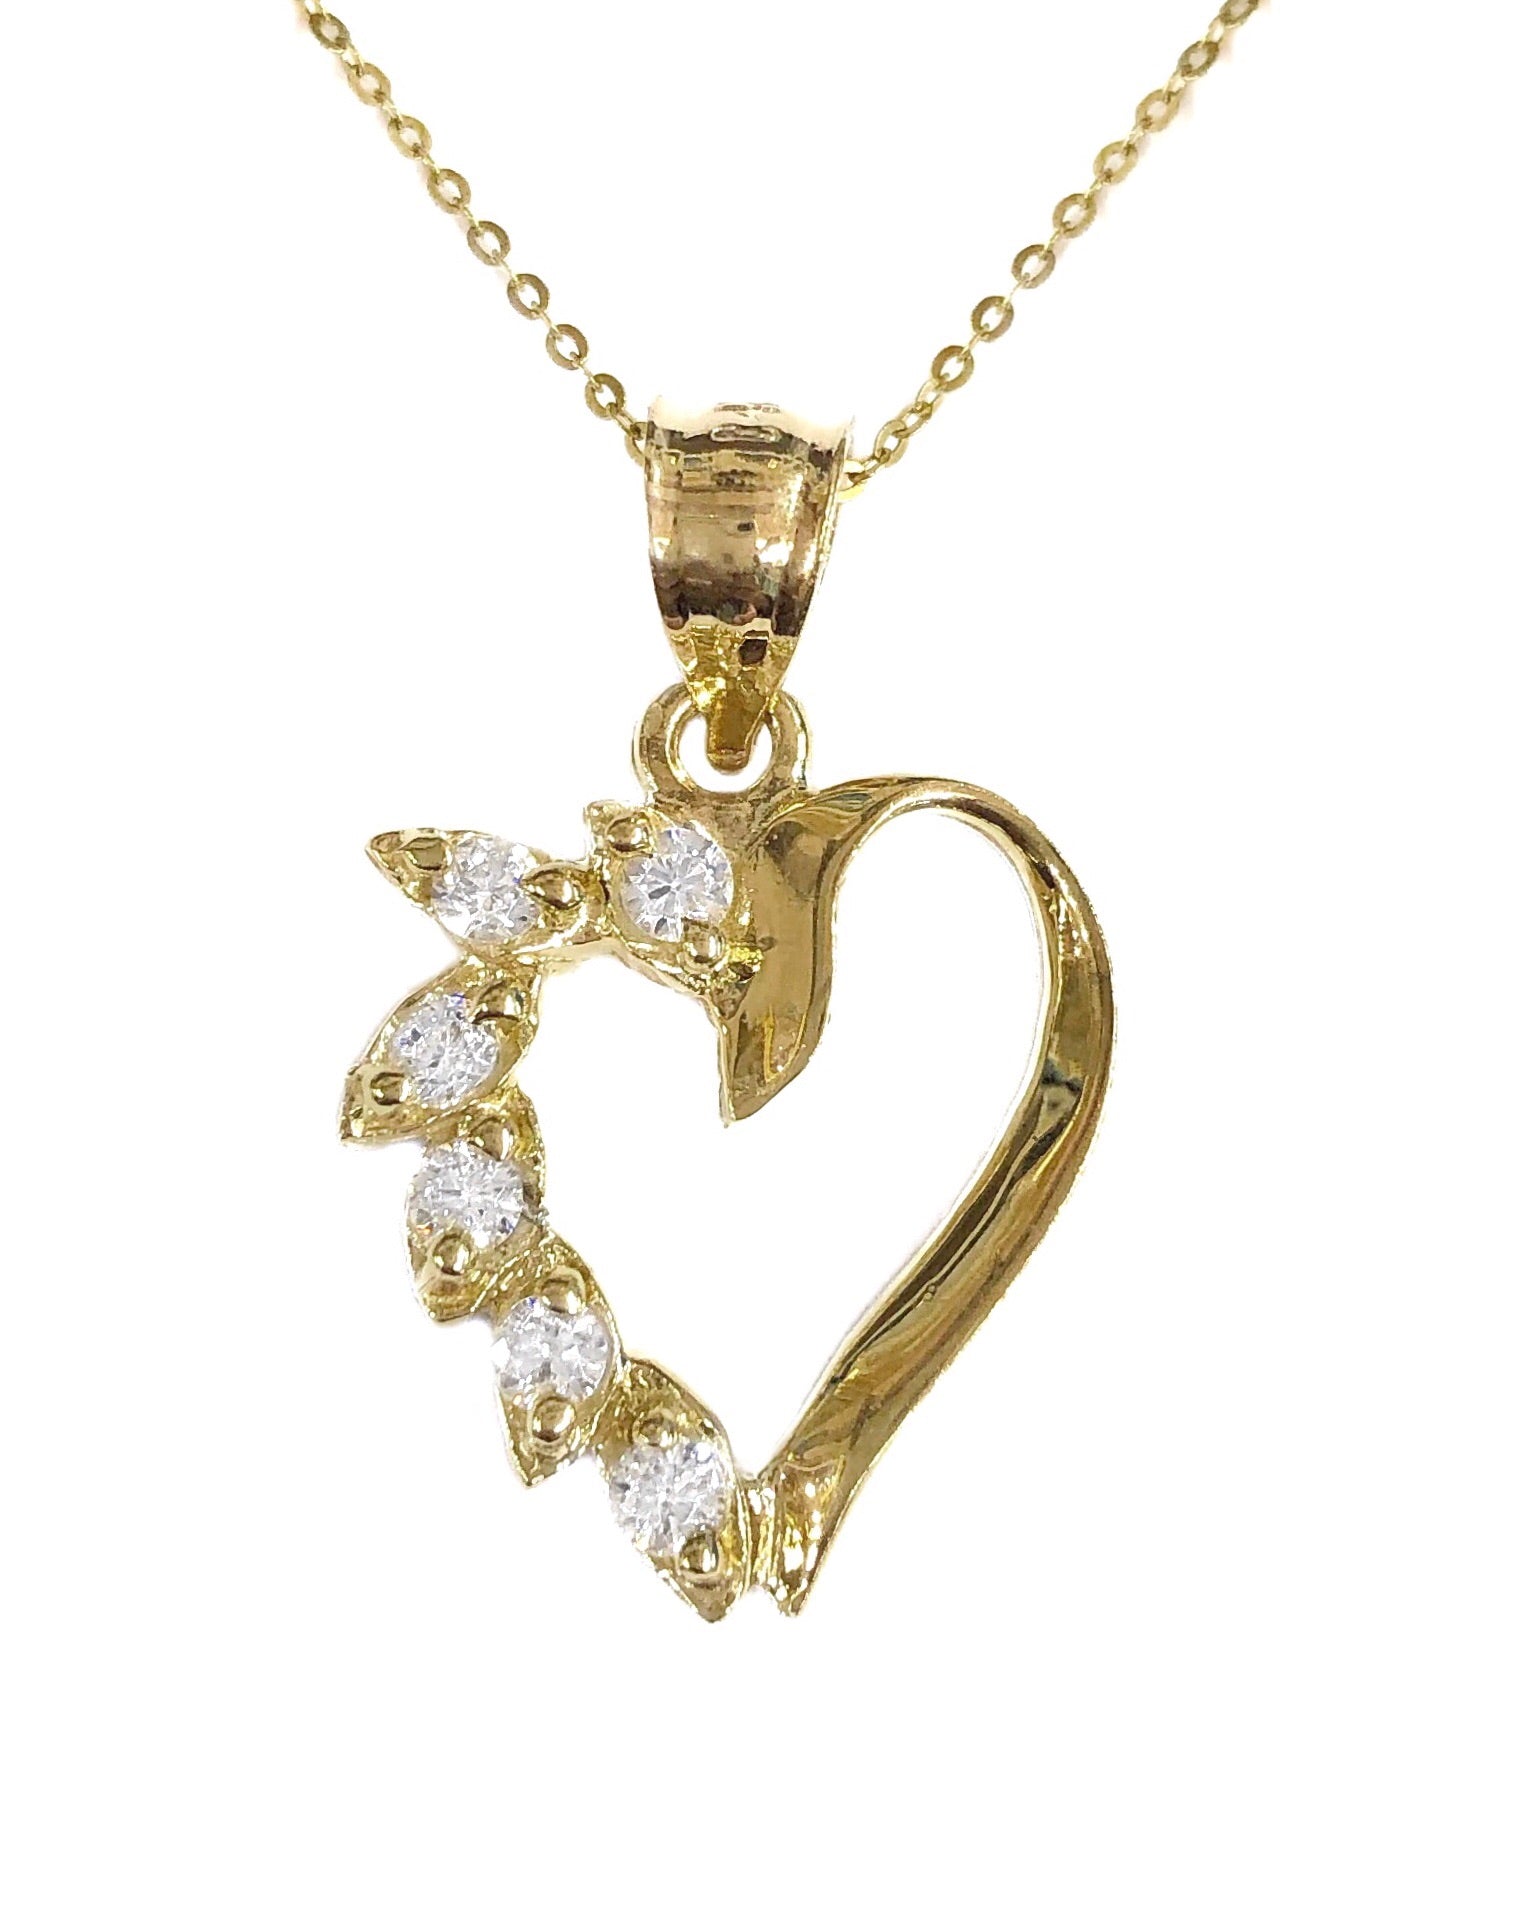 14K YELLOW GOLD AMOR MIO NECKLACE